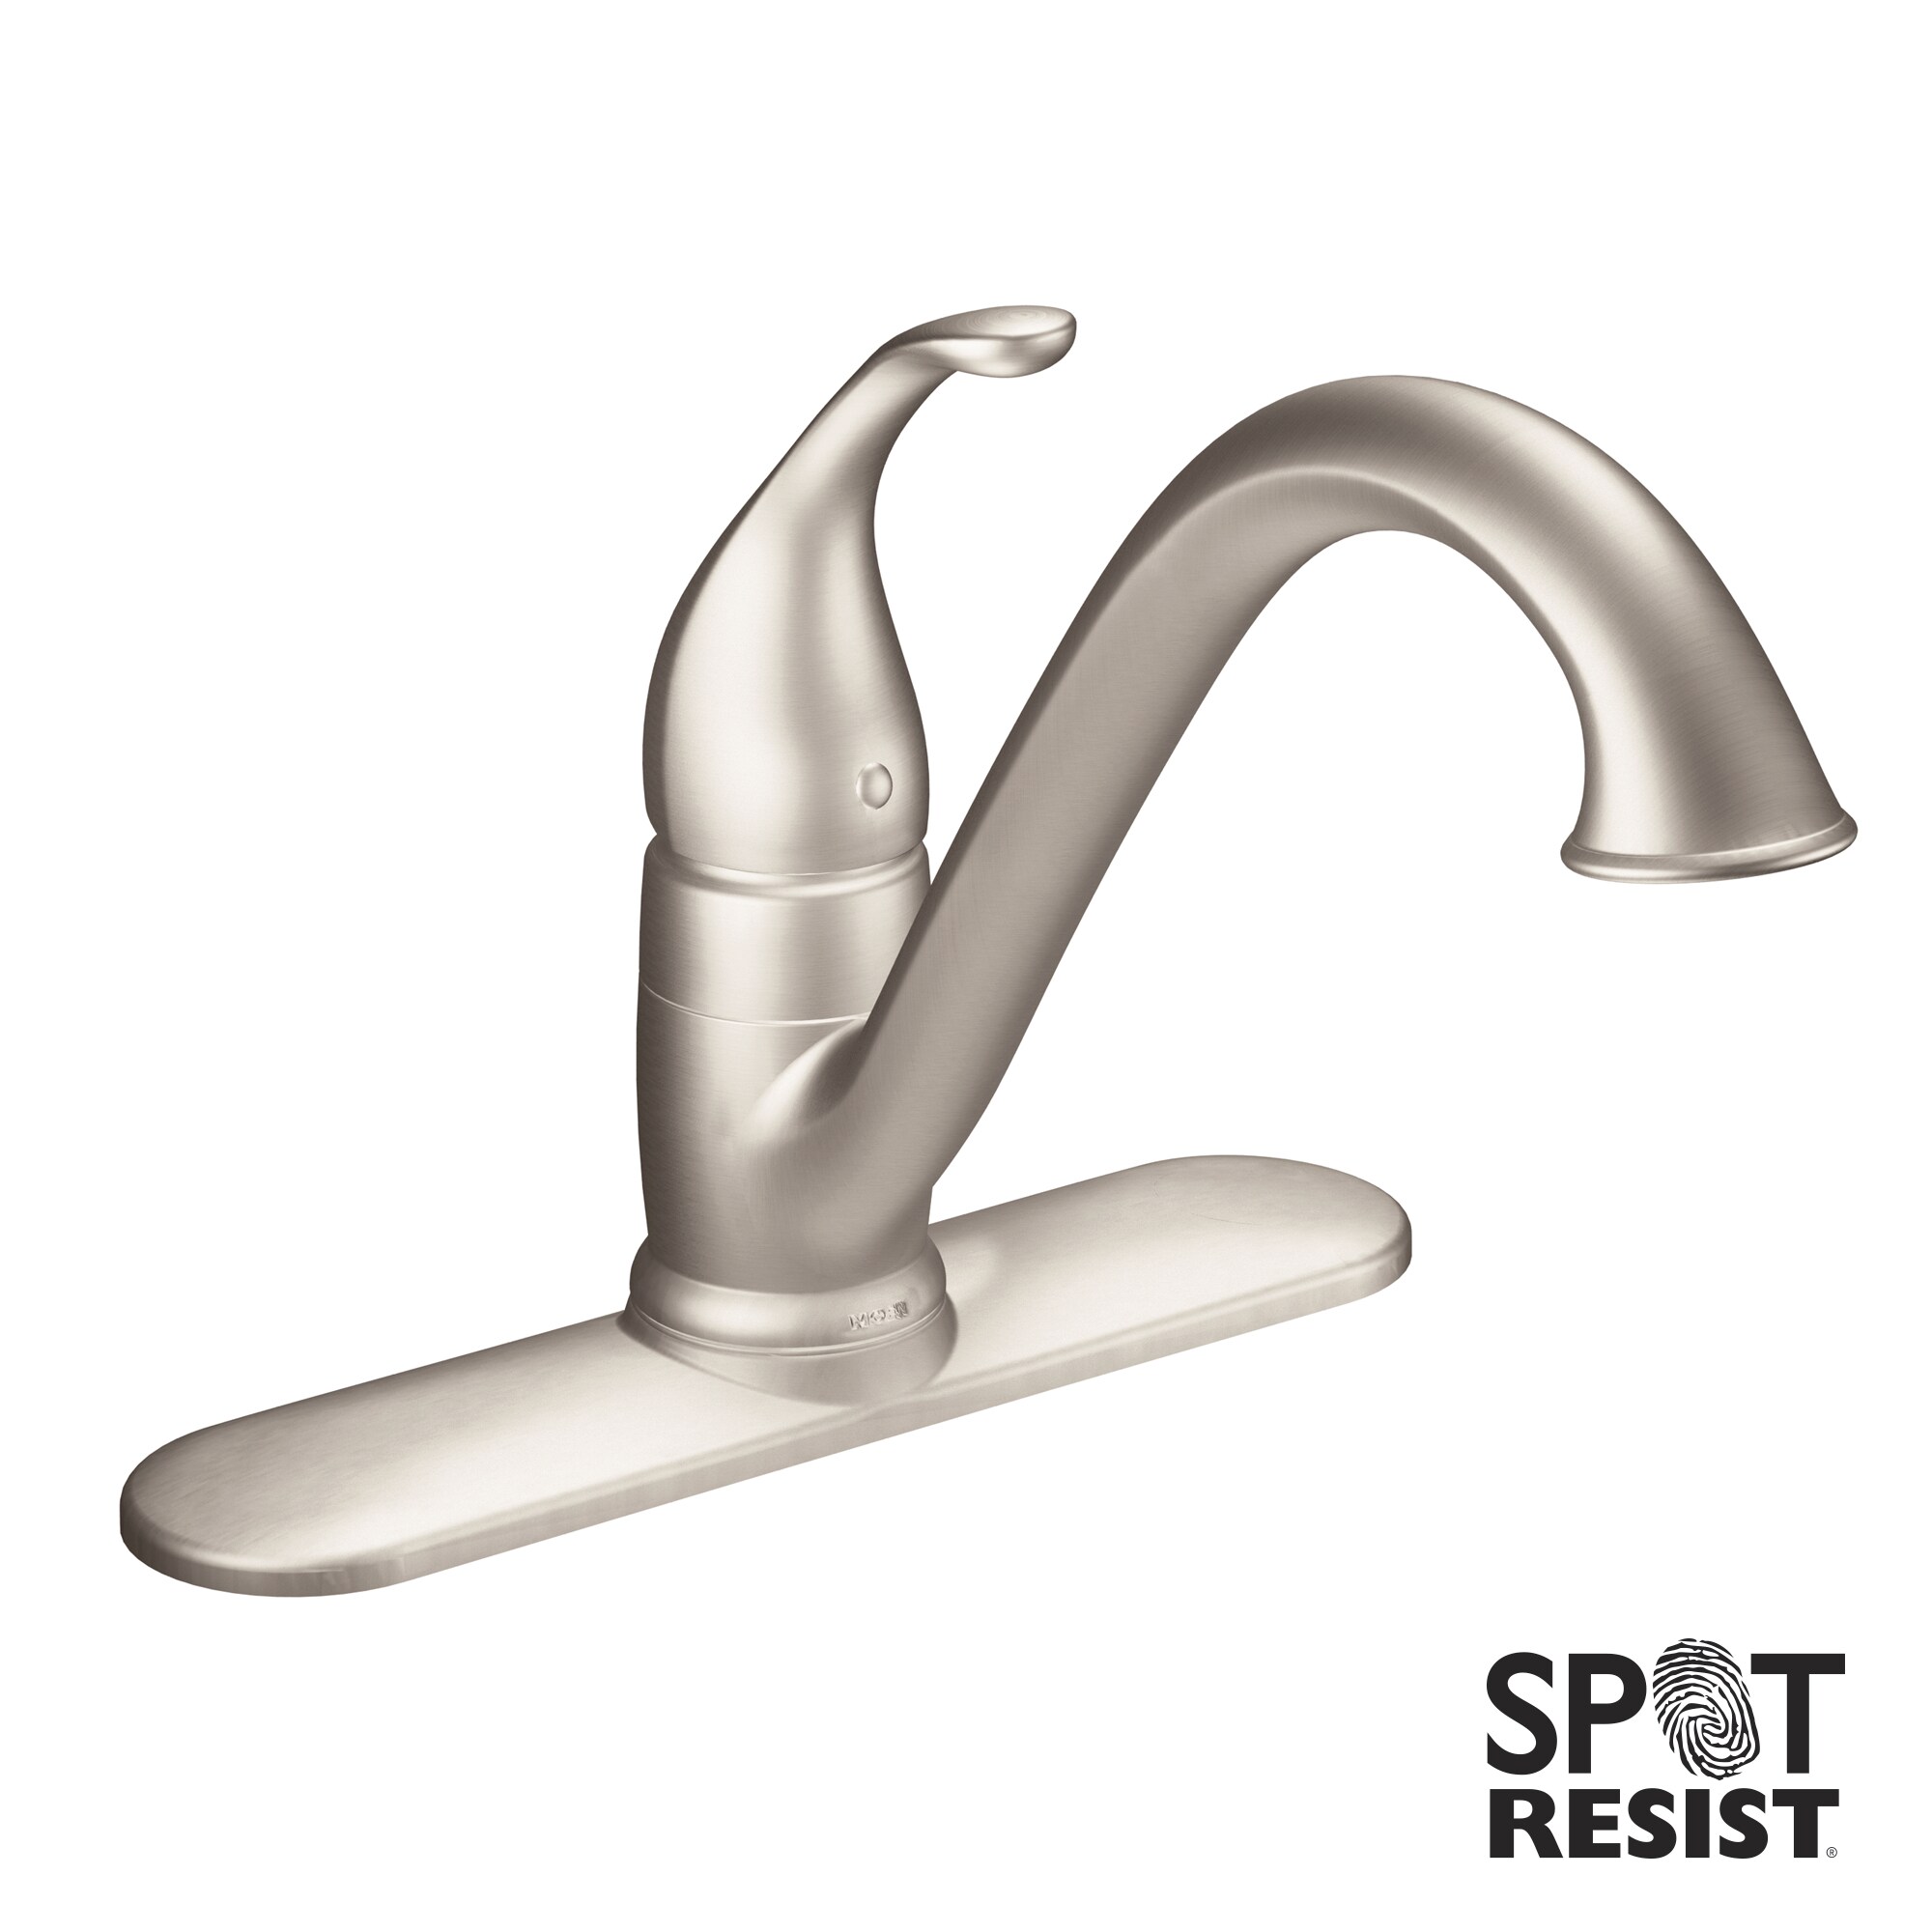 Moen Camerist Spot Resist Stainless Single Handle High-arc Kitchen Faucet with Sprayer Function (Deck Plate Included)